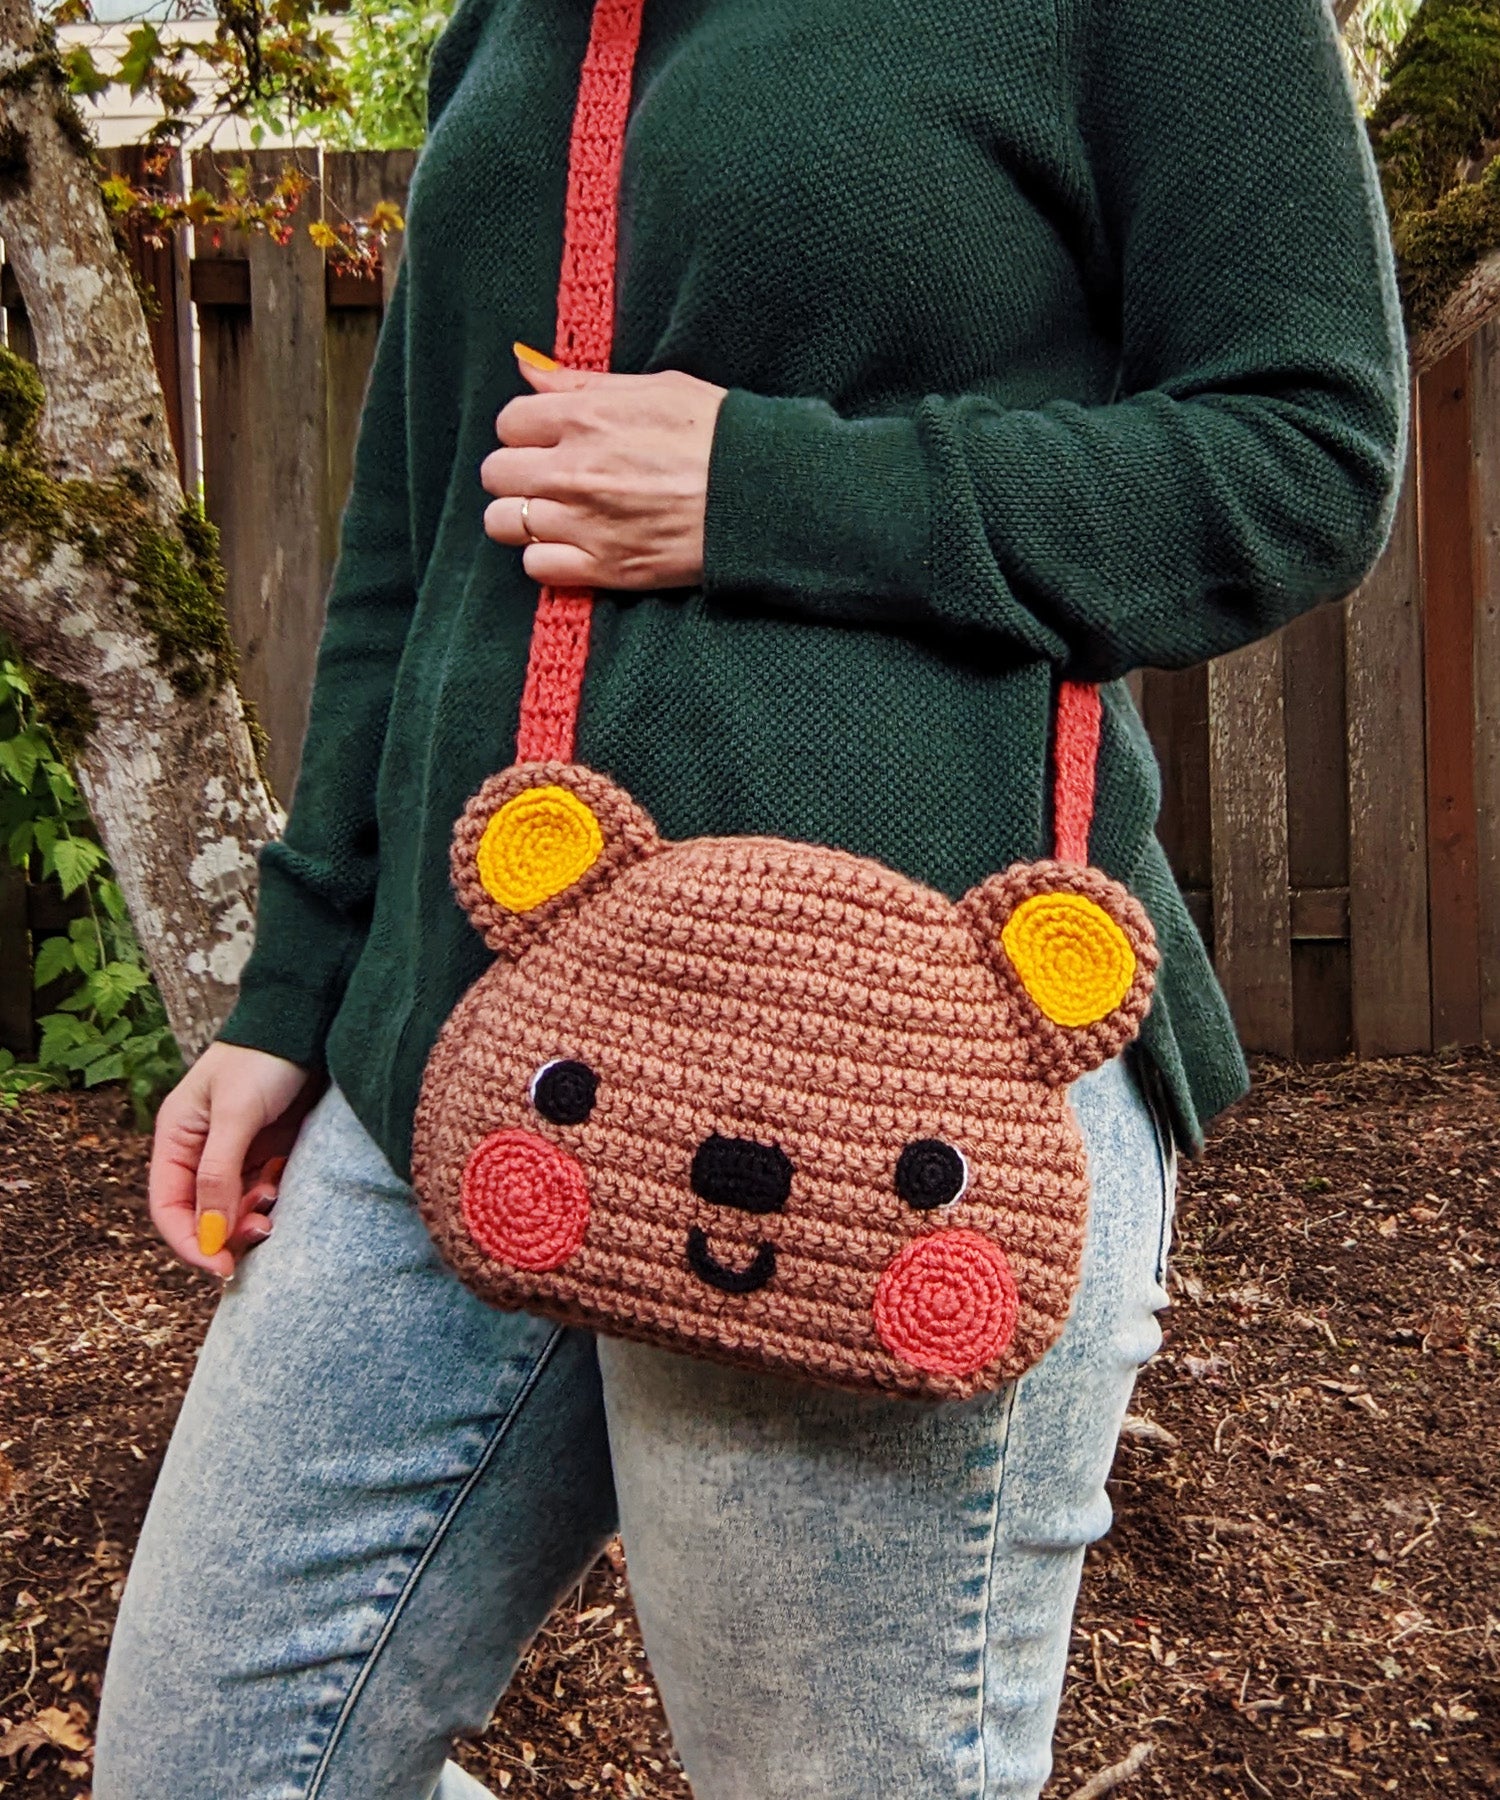 Pin on Crochet Bag Patterns (free and paid)